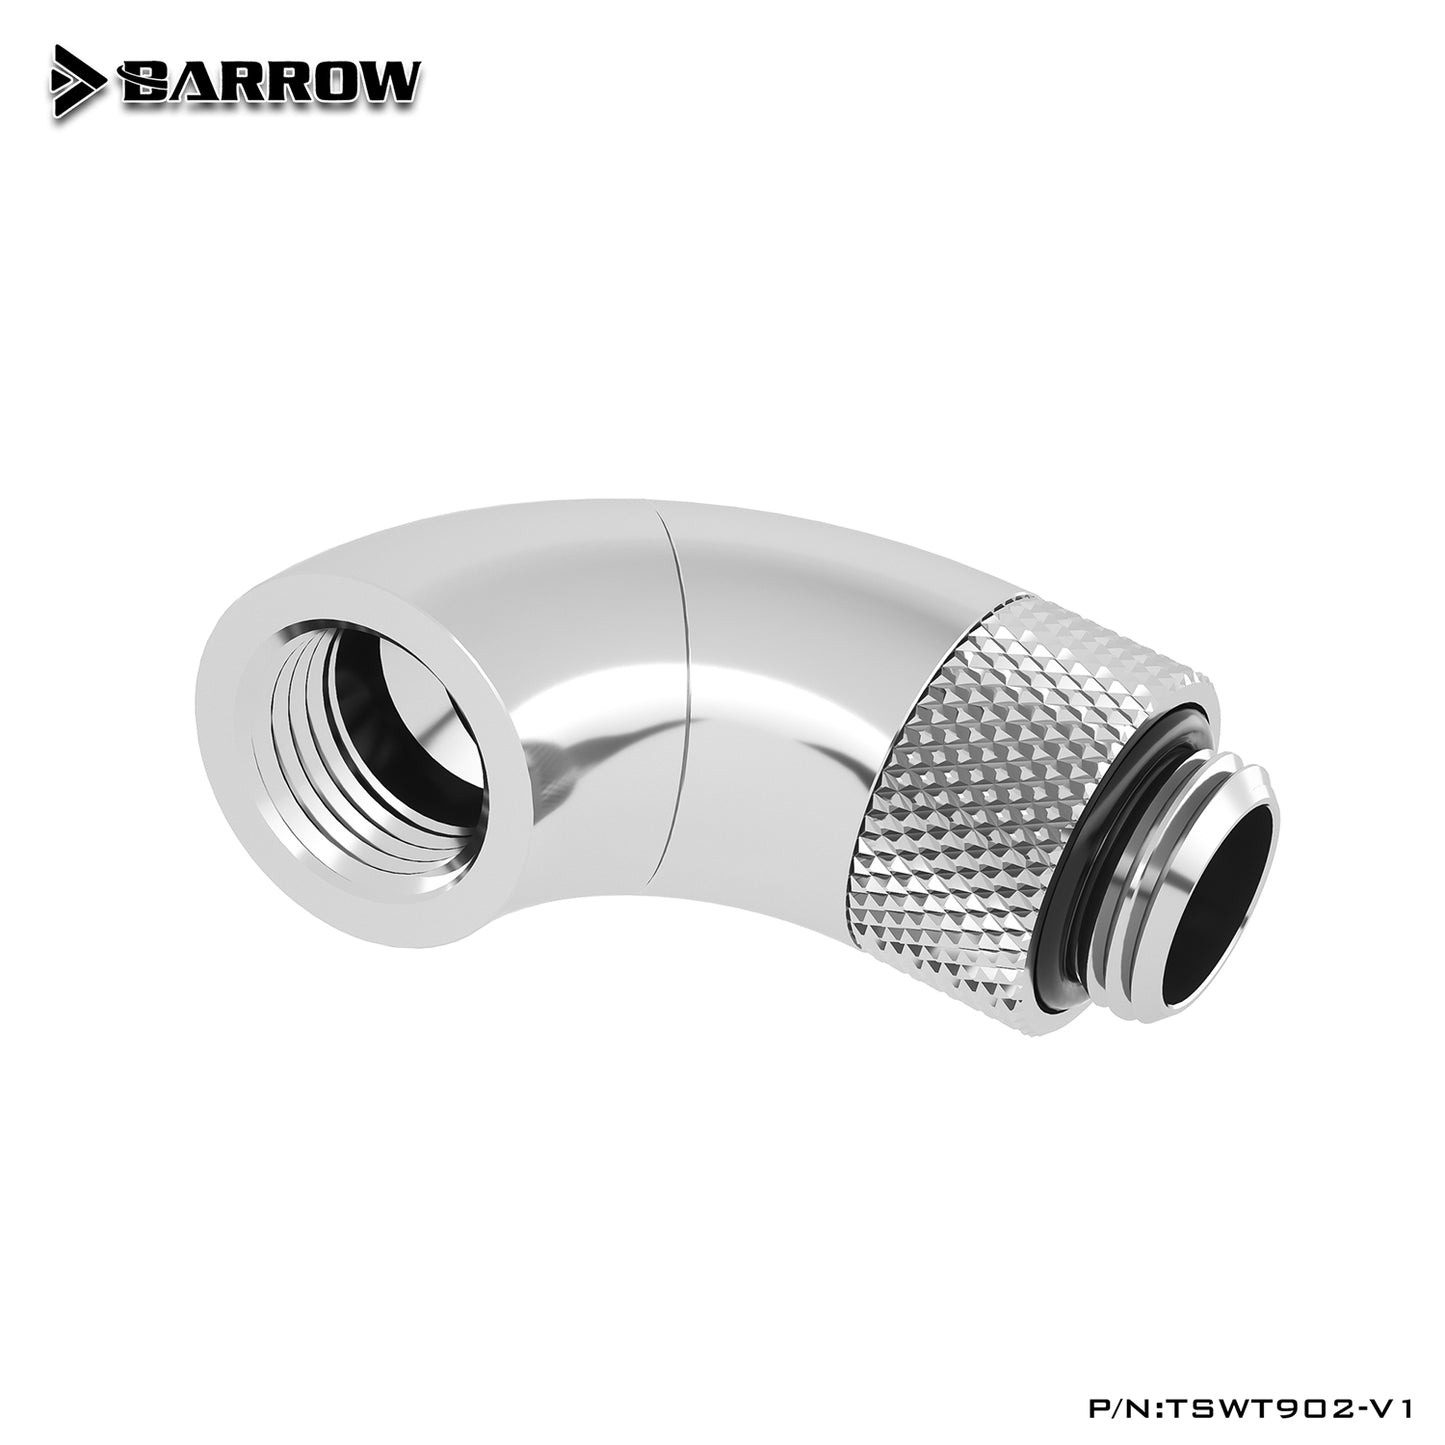 Barrow G1/4" Dual Rotary 90-Degree 360 Degree Rotatable IG1/4" Extender Water Cooling Fittings, TSWT902-V1